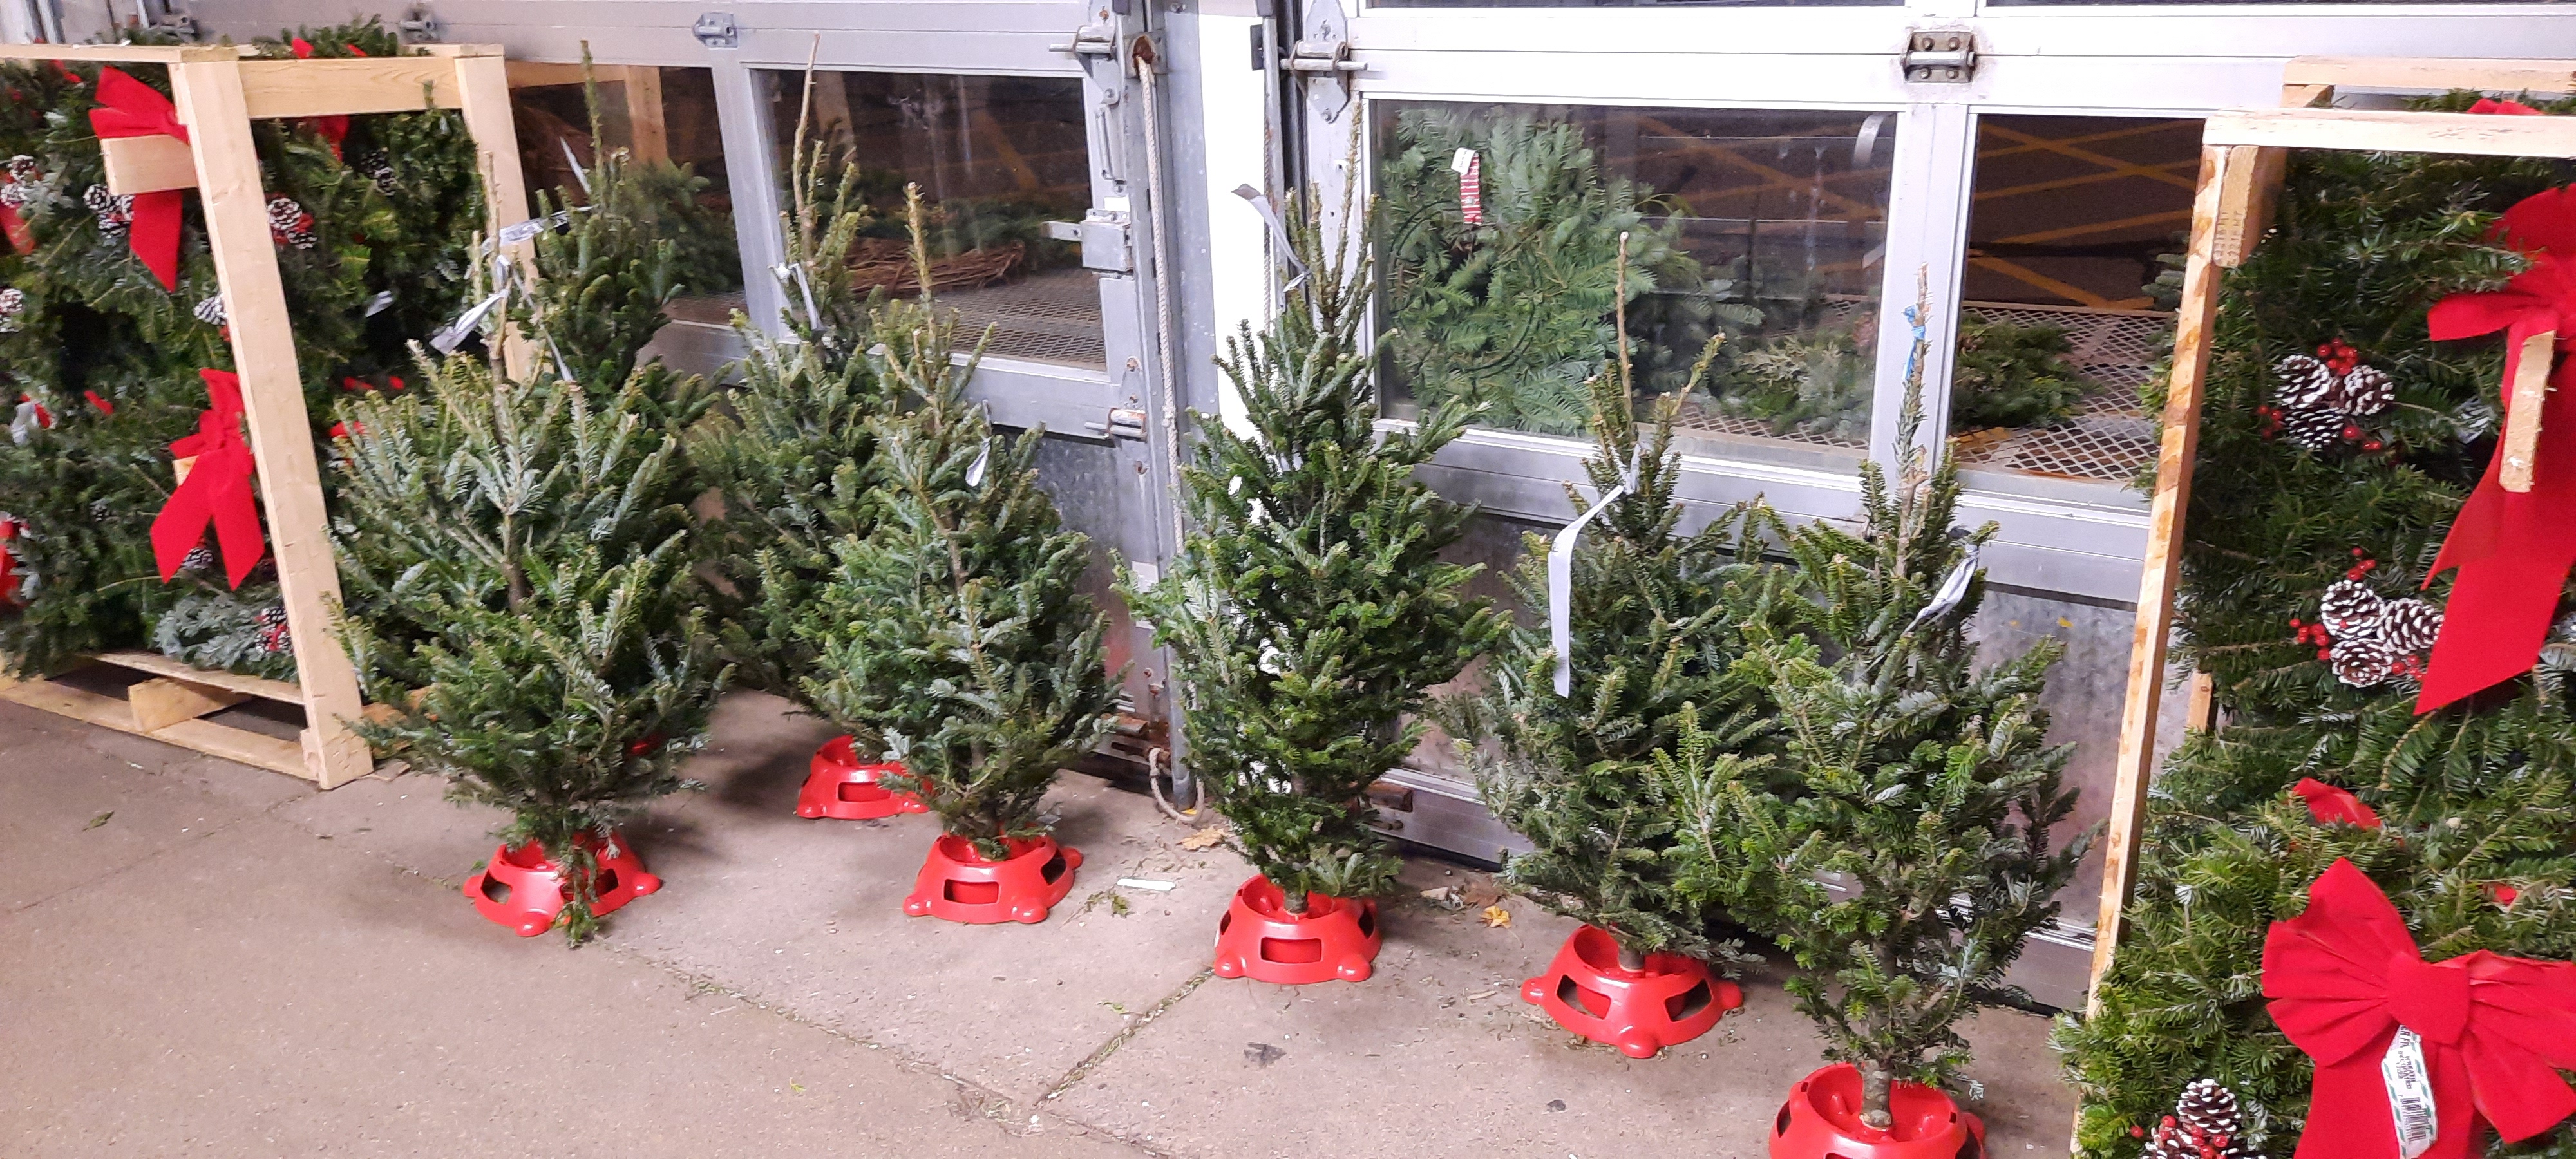 Cut tabletop Christmas trees on display for sale at a store.